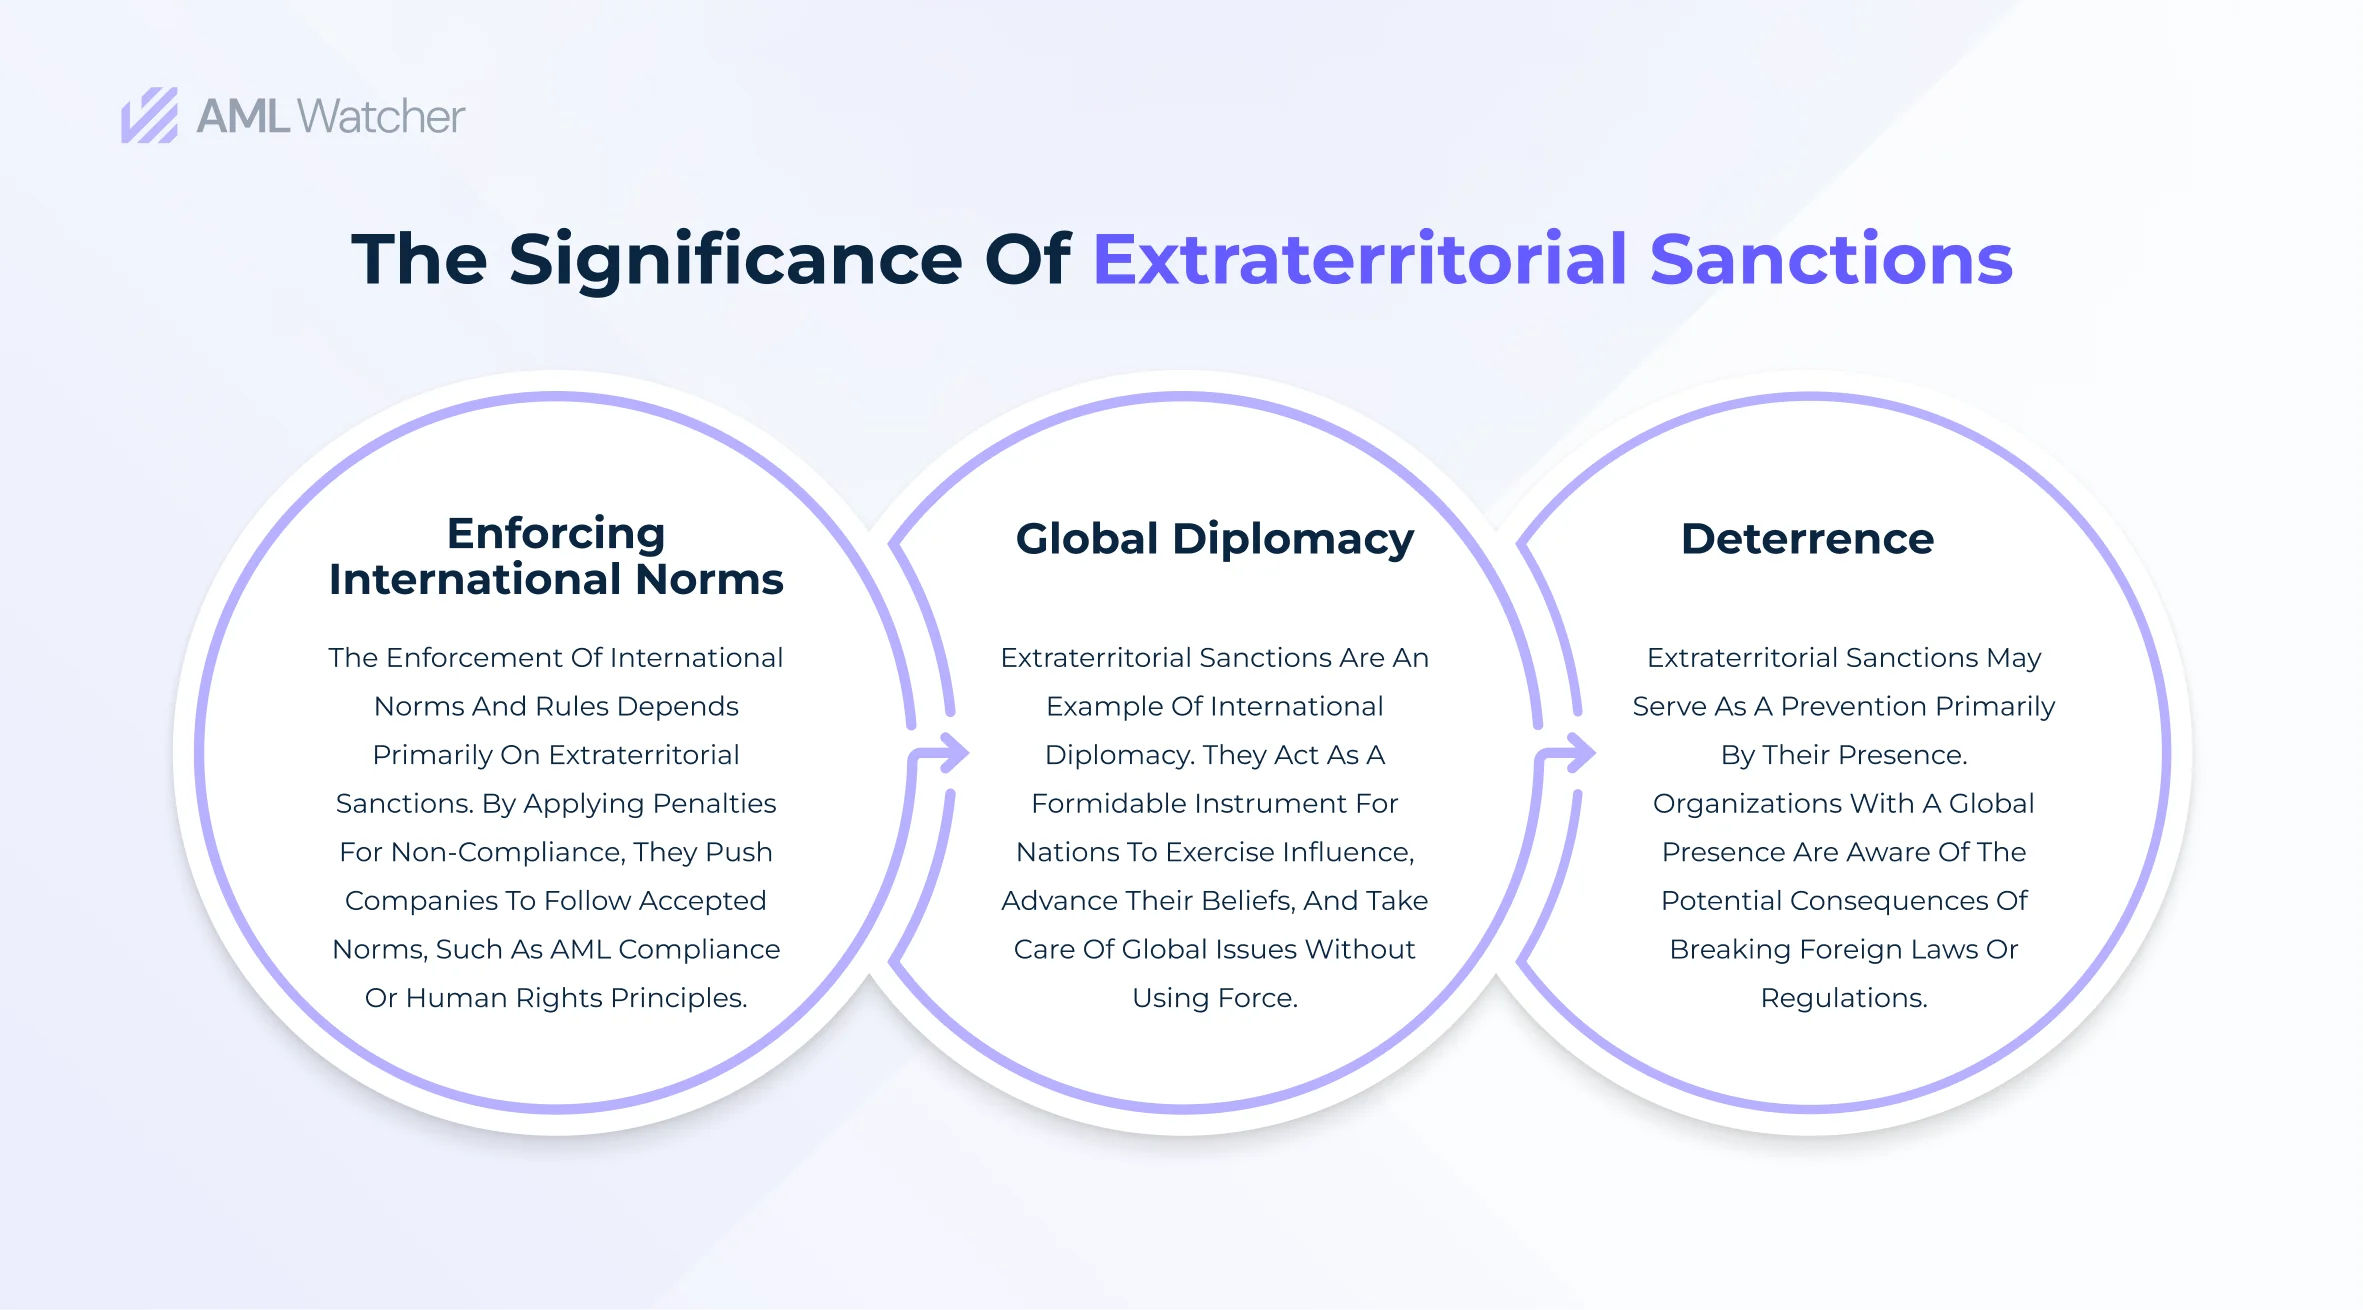 The Significance of Extraterritorial Sanctions